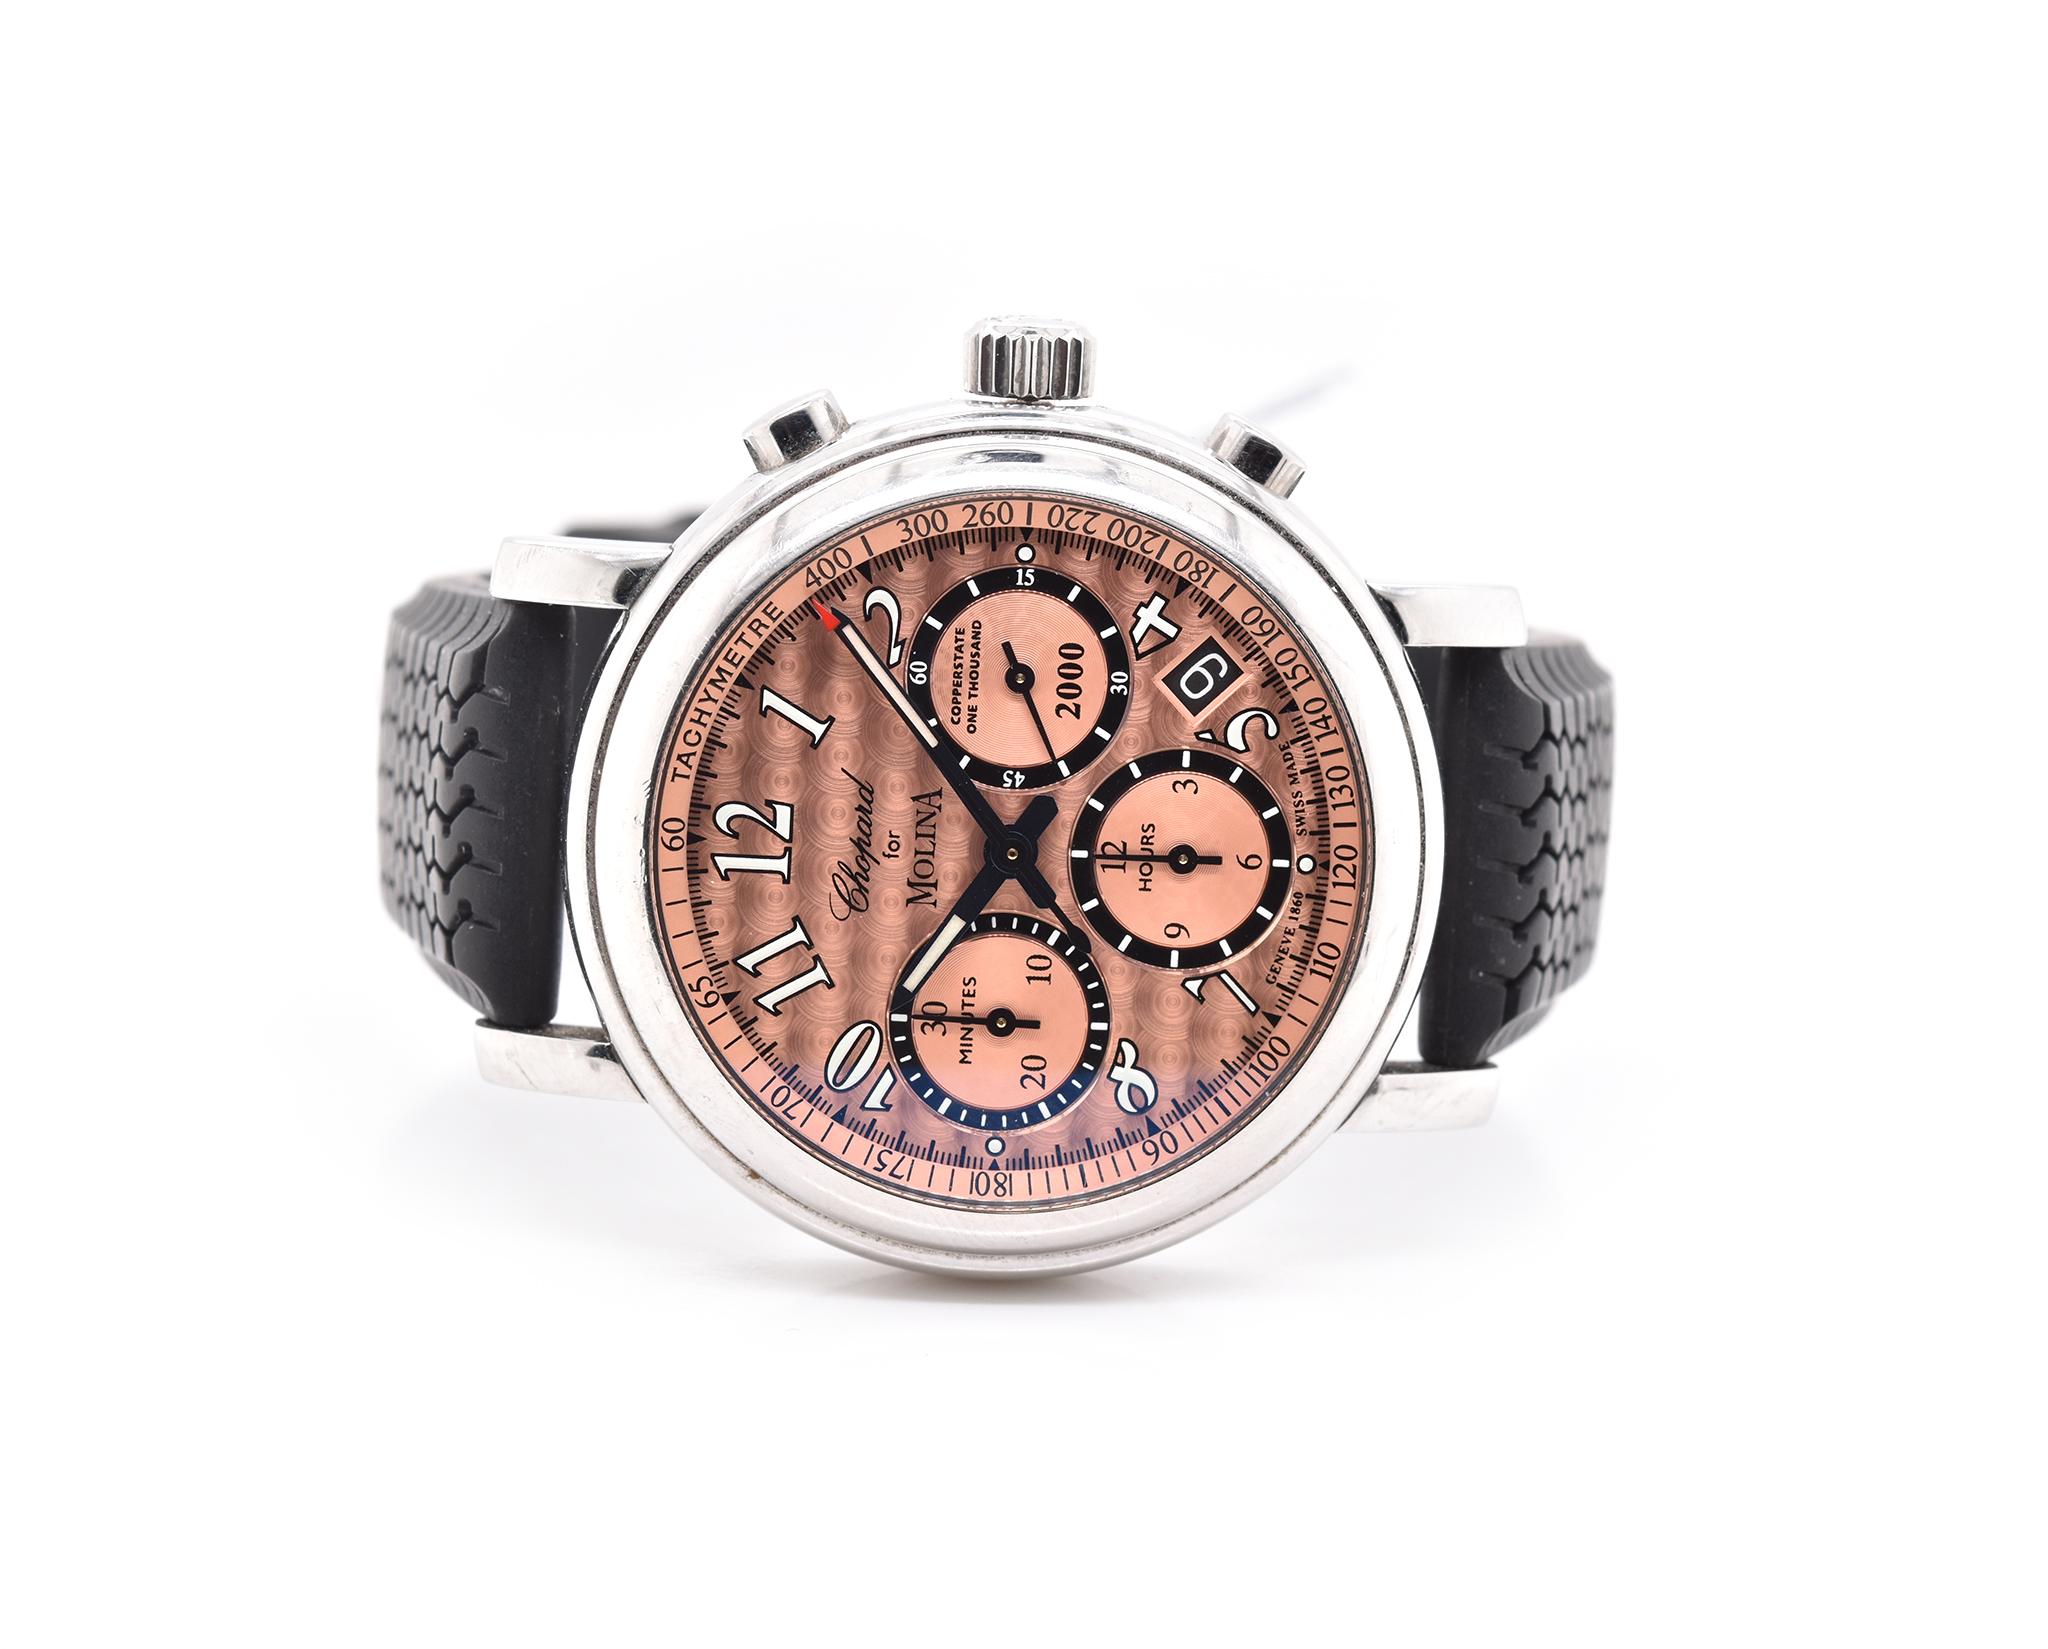 Movement: automatic
Function: hours, minutes, seconds, date, chrono
Case: 38mm case, push/pull crown, sapphire crystal
Band: Chopard black rubber strap with buckle 
Dial: copper arabic dial with chrono
Reference #: 8331
Serial: 718XXX   50/100

No